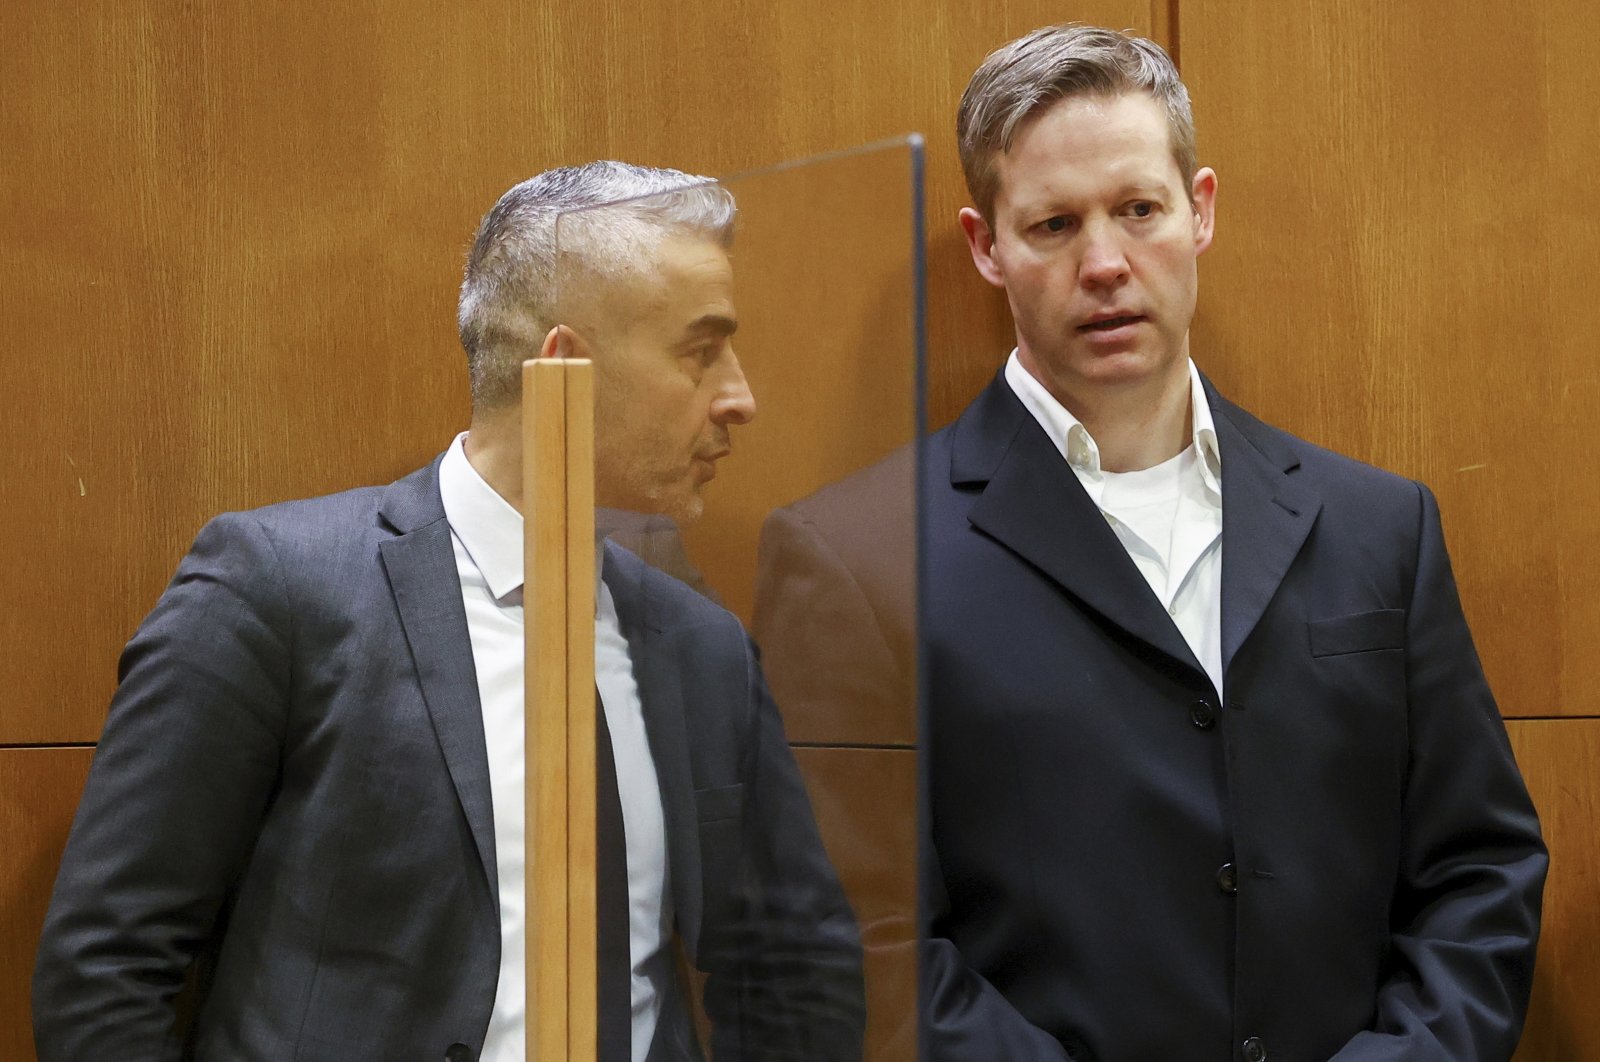 Main defendant Stephan Ernst (R), talks to his lawyer Mustafa Kaplan (L), in the courtroom at the higher regional court in Frankfurt, Germany, Jan. 28, 2021. (AP Photo)